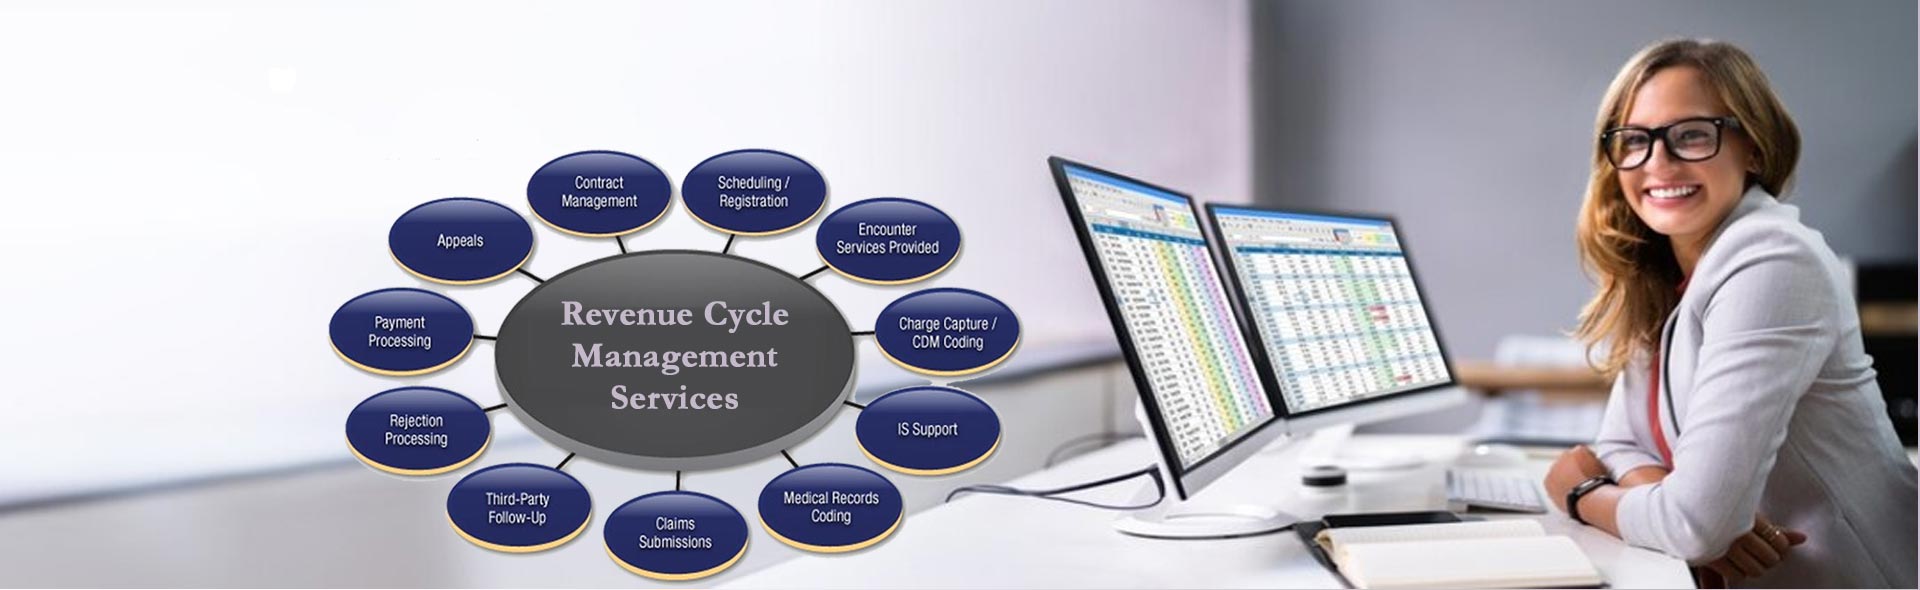 how-to-optimize-revenue-cycle-management-banner